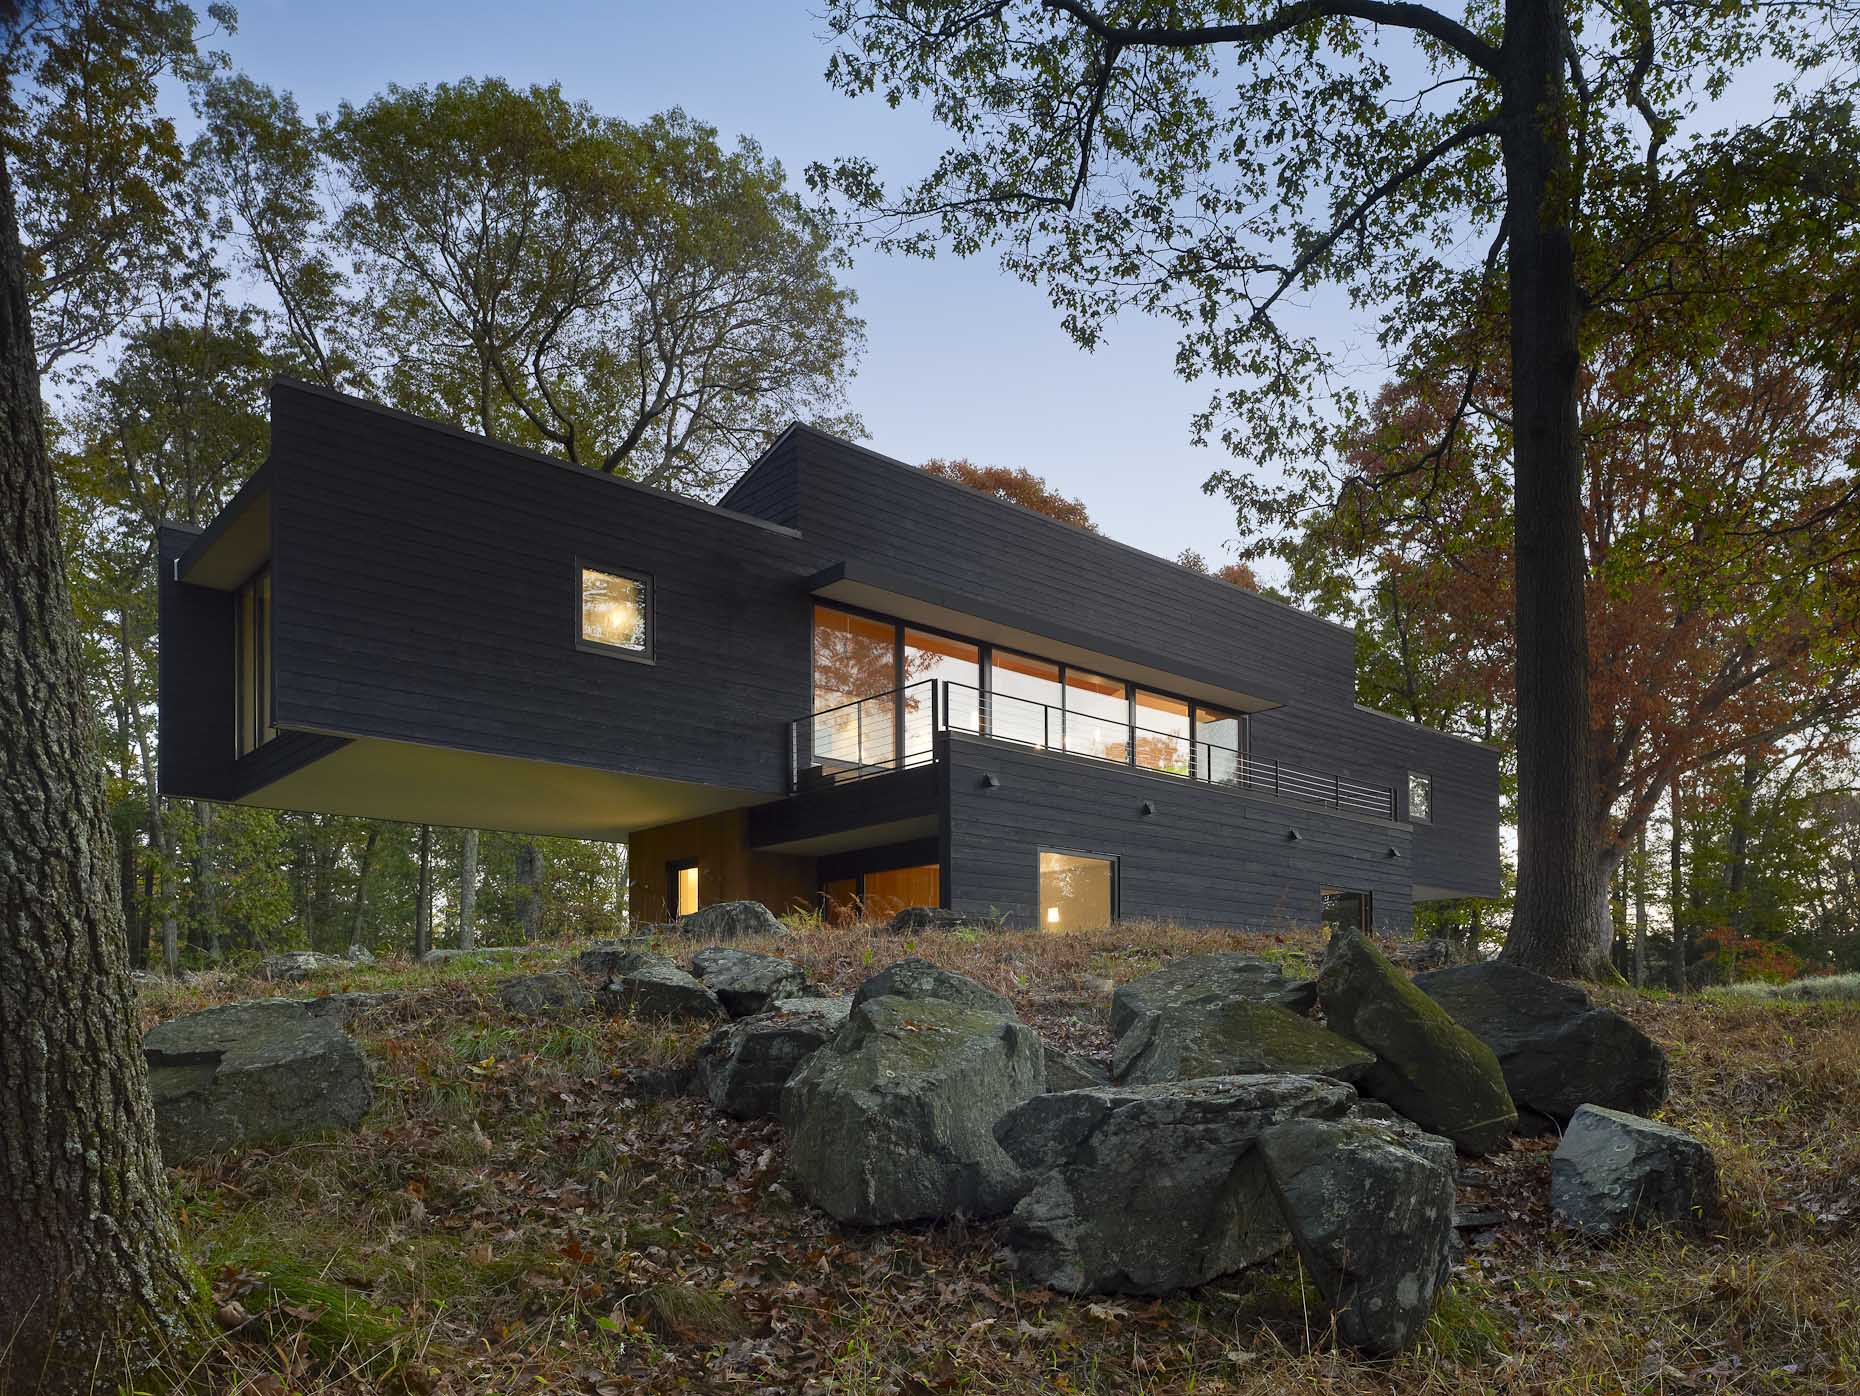 Waccabuc Private Residence by Chan-Li Lin & Denise Ferris photographed by Brad Feinknopf based in COlumbus, Ohio